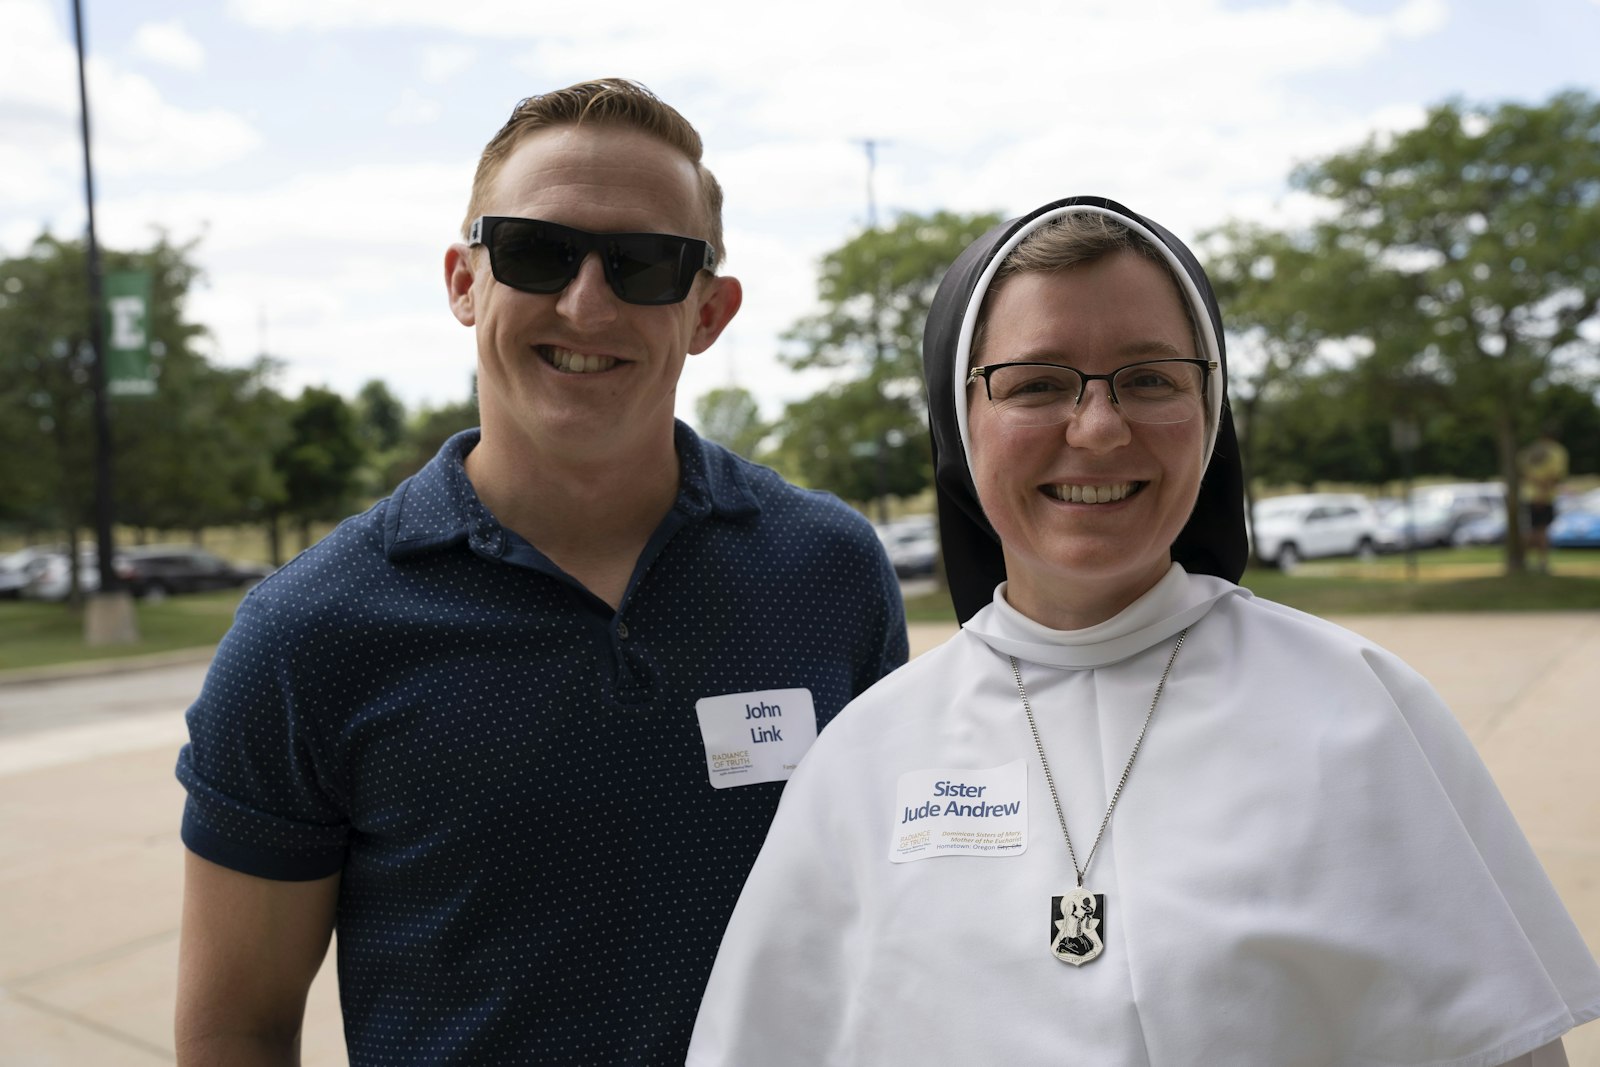 Sr. Jude Andrew, OP, is pictured with her brother, John Link. He was one of the many family members of the sisters to attend the event.